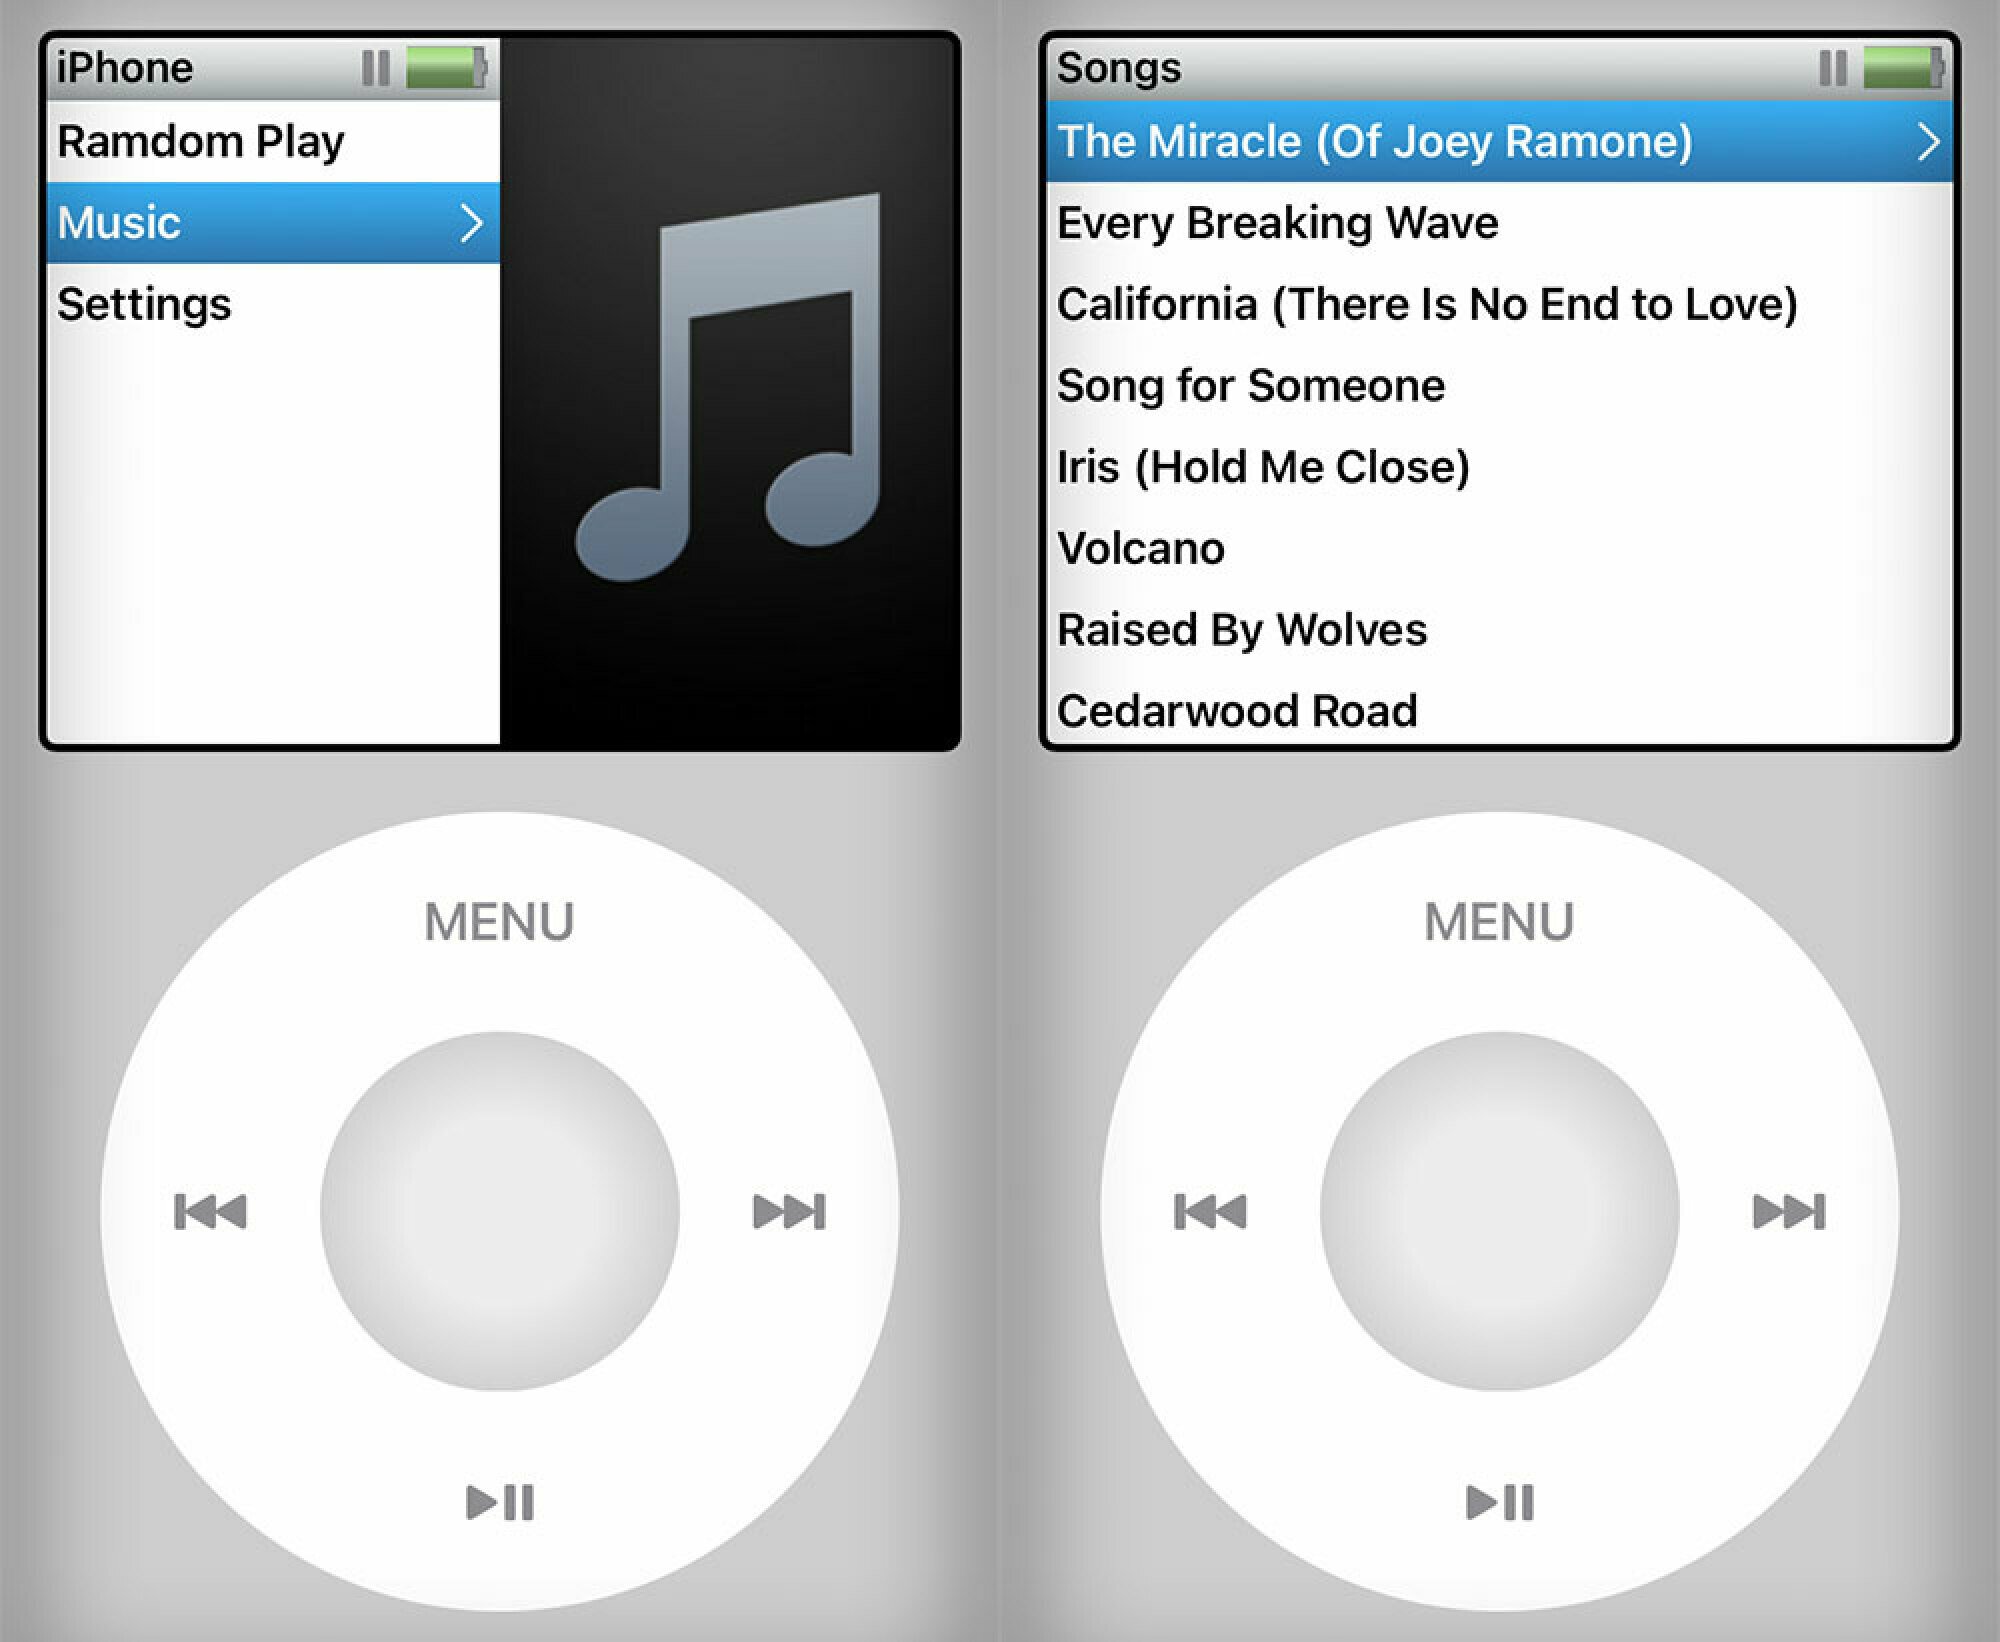 Two images side-by-side that show the display of the app Retro Pod, which looks like the display of an iPod Classic.